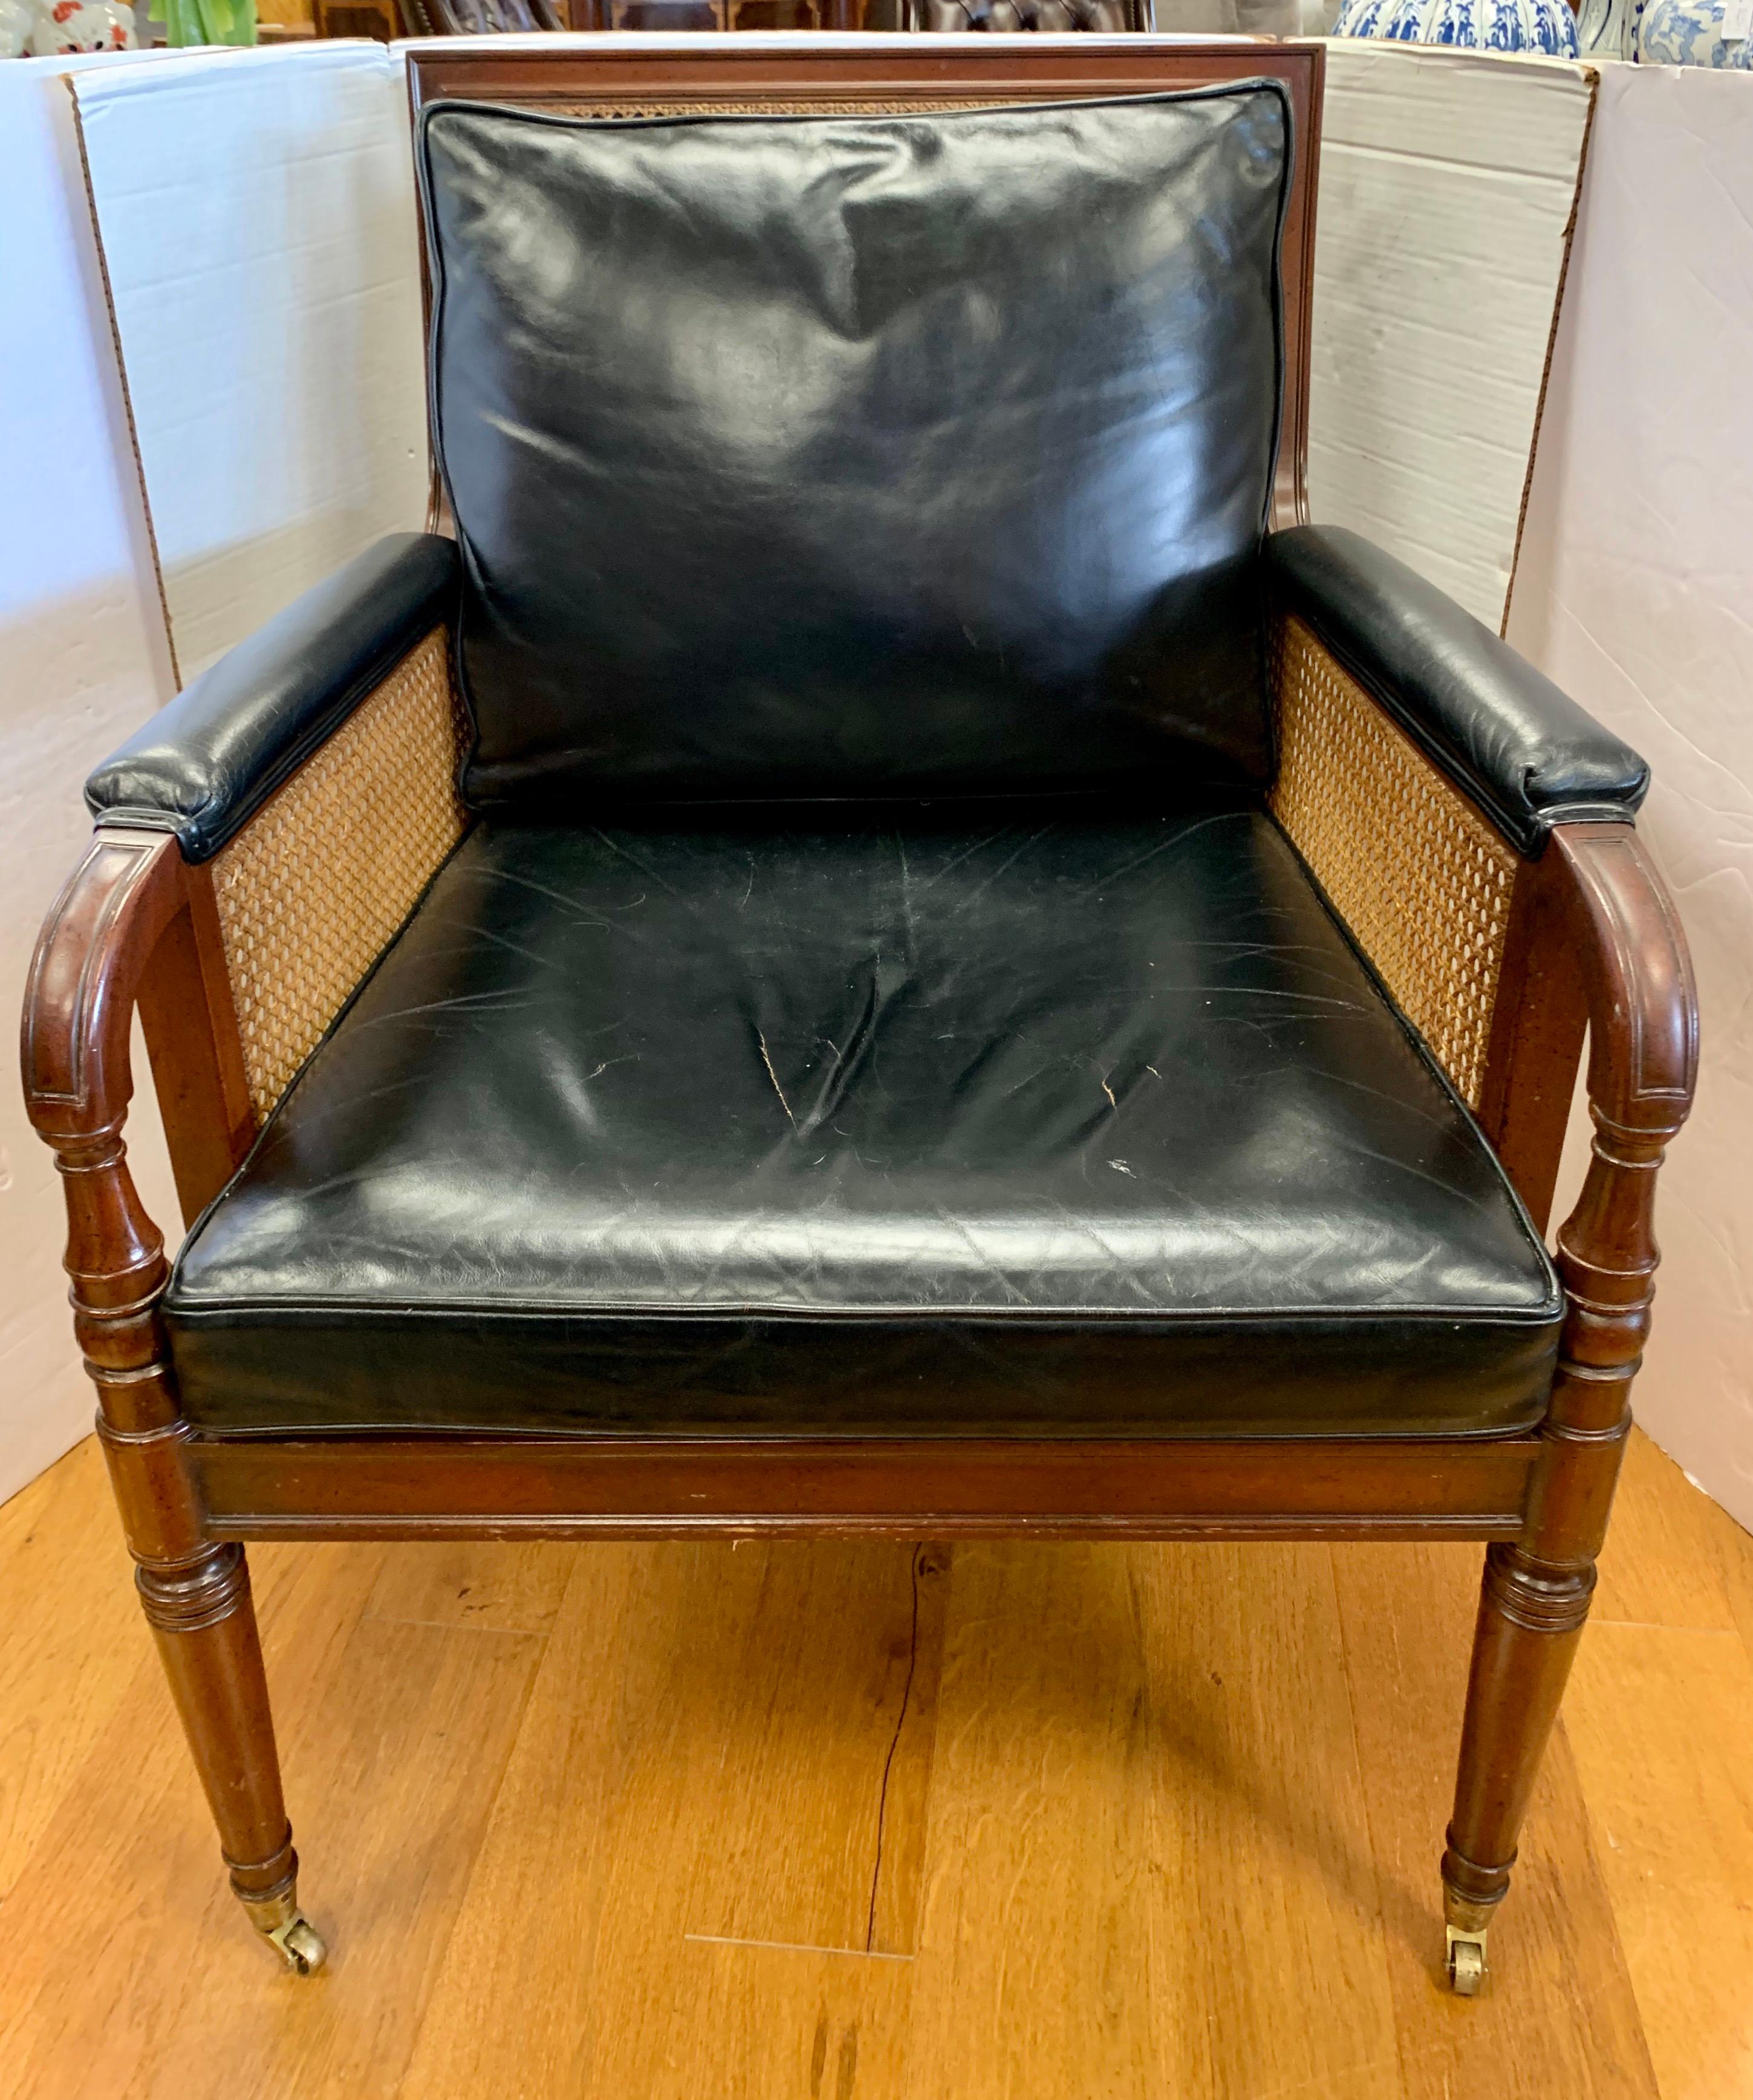 Vintage 1950s rare Kittinger Furniture black leather chair that features caning and caster wheels. Made in the USA and still in great condition, especially given its age. That said, the leather seat has some creasing which adds to its luster. The